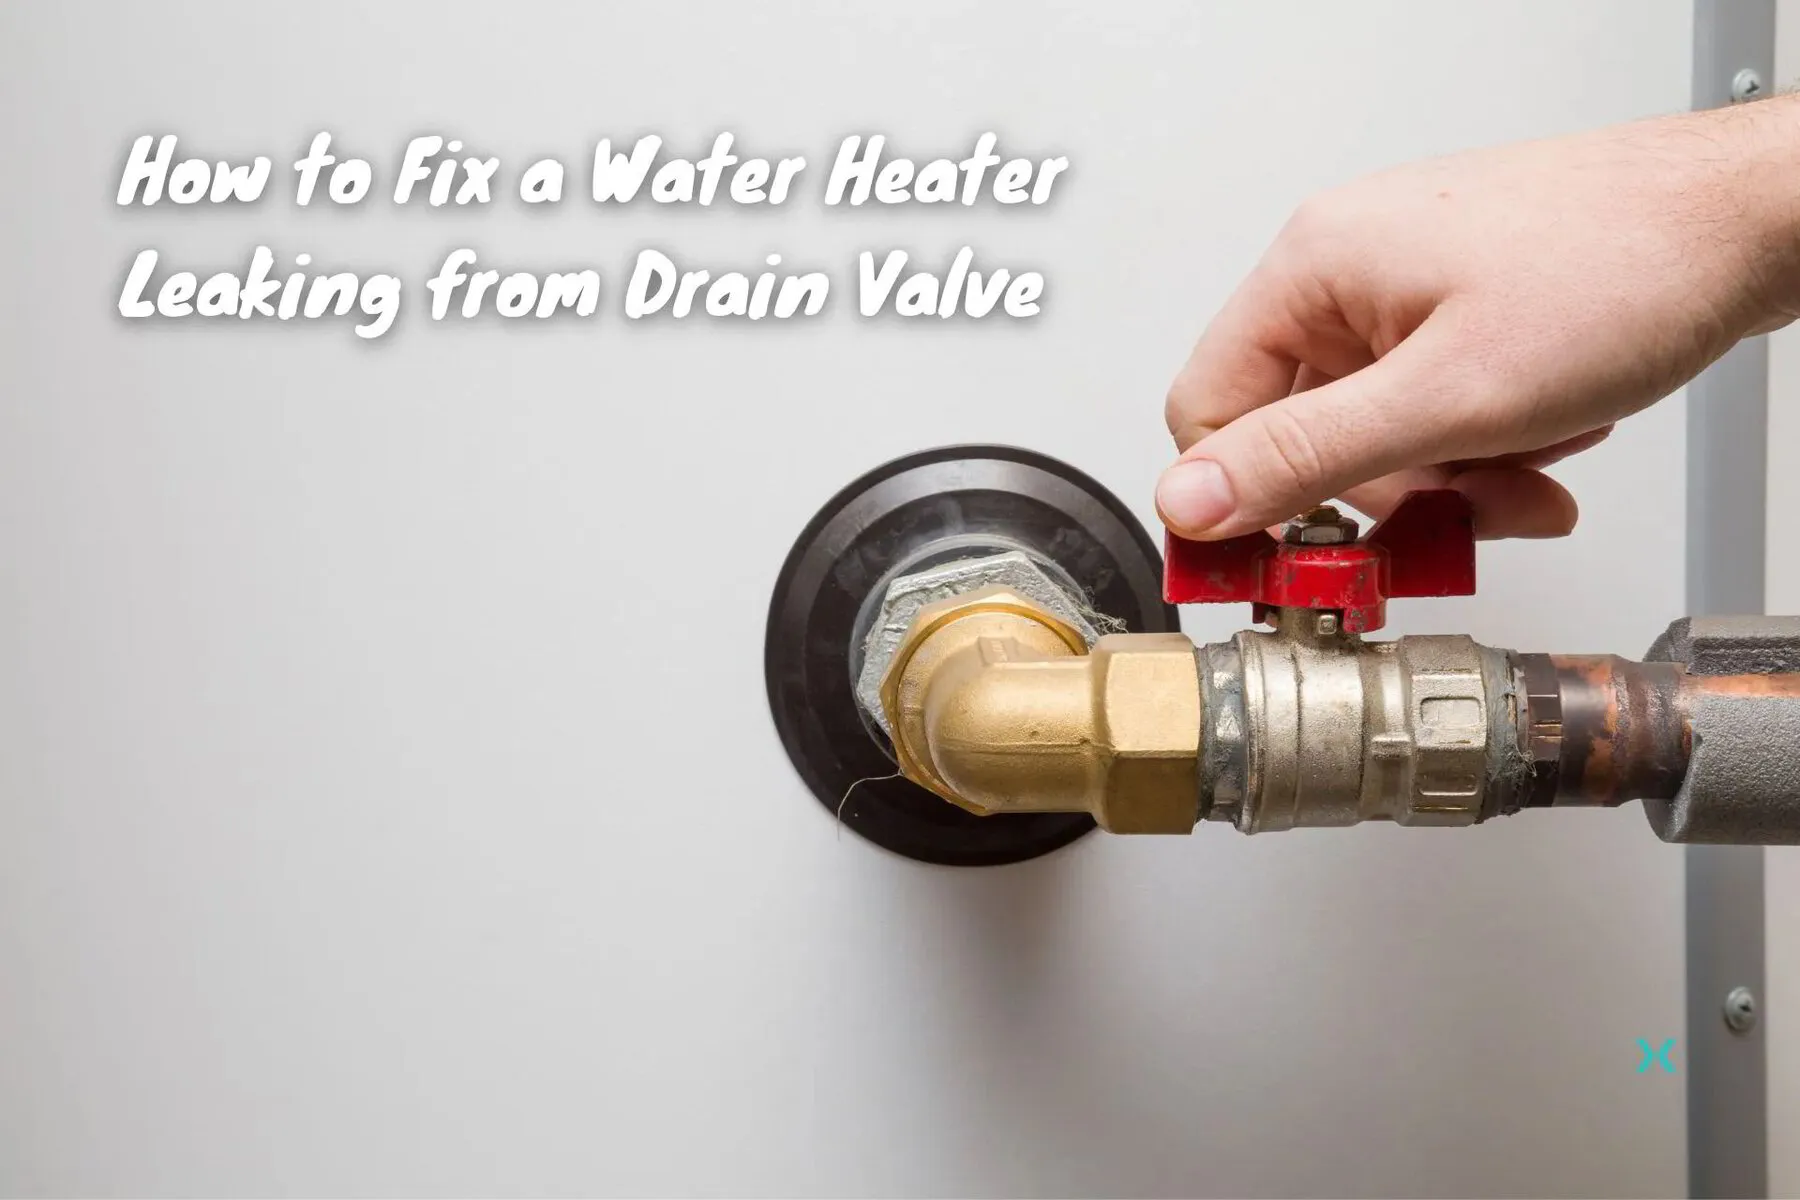 How to Fix a Water Heater Leaking from Drain Valve | DIY Home Comfort